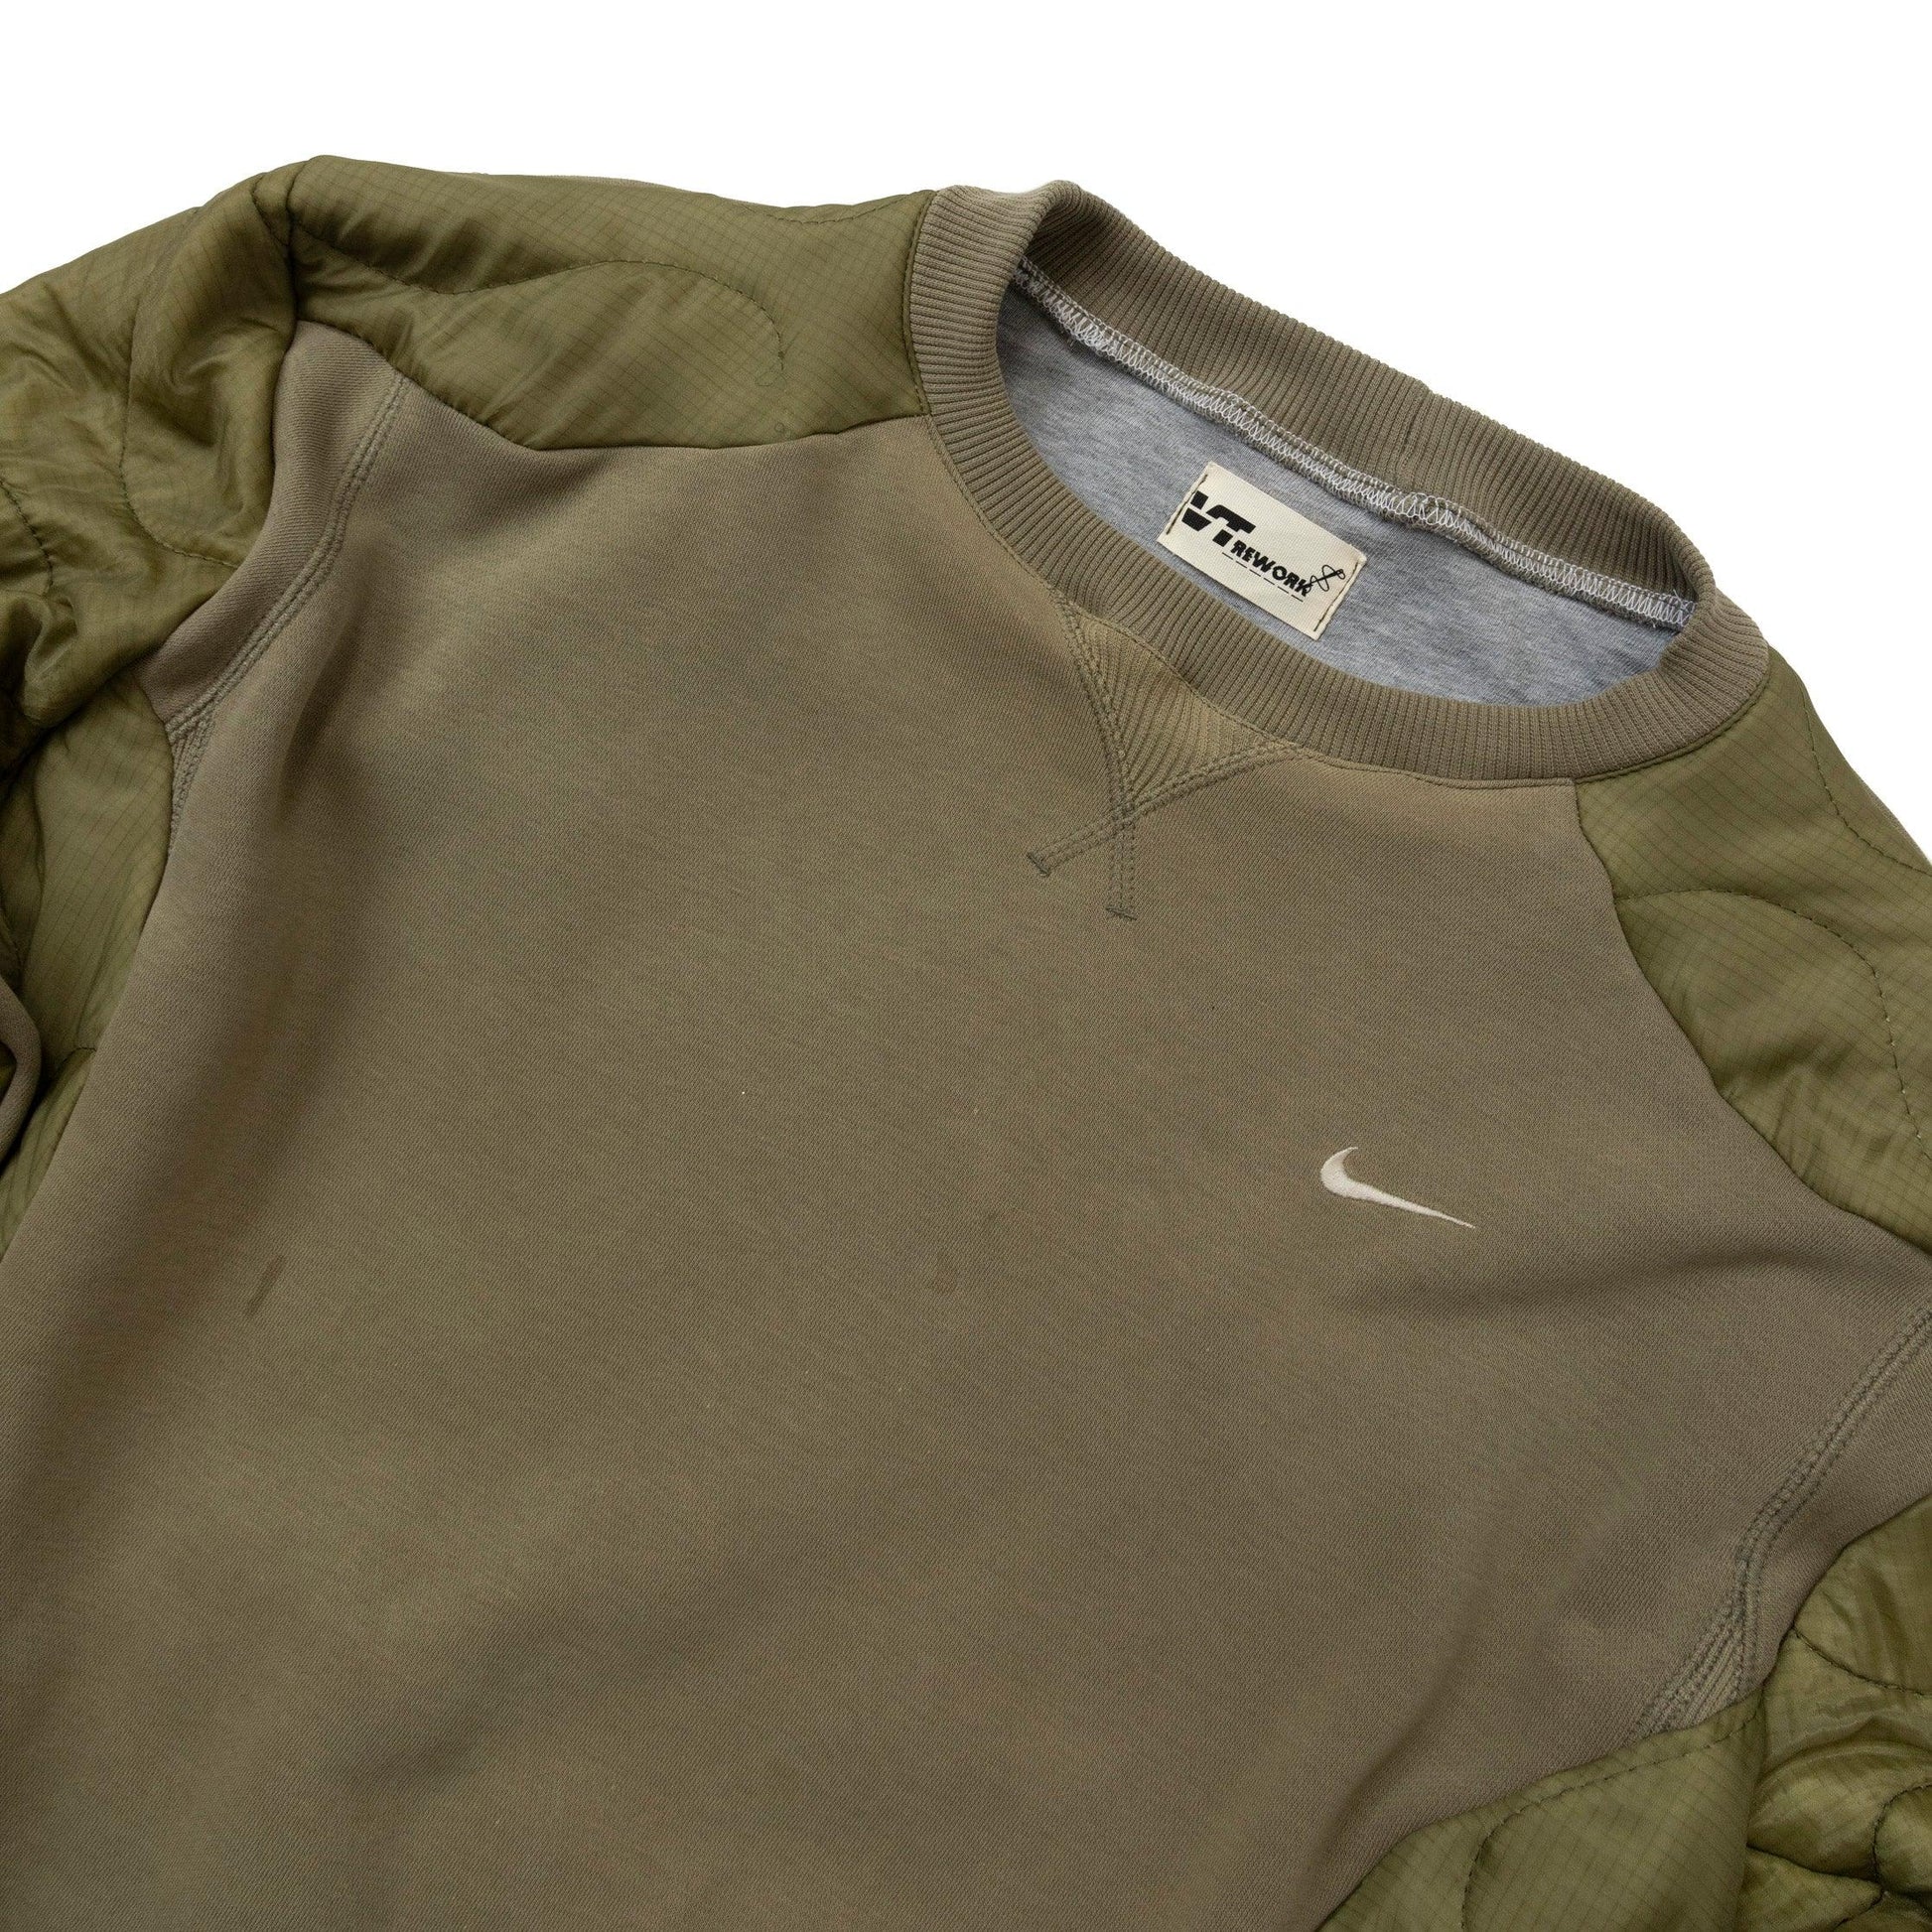 VT Rework: Nike Technical Panel Sweater - Known Source